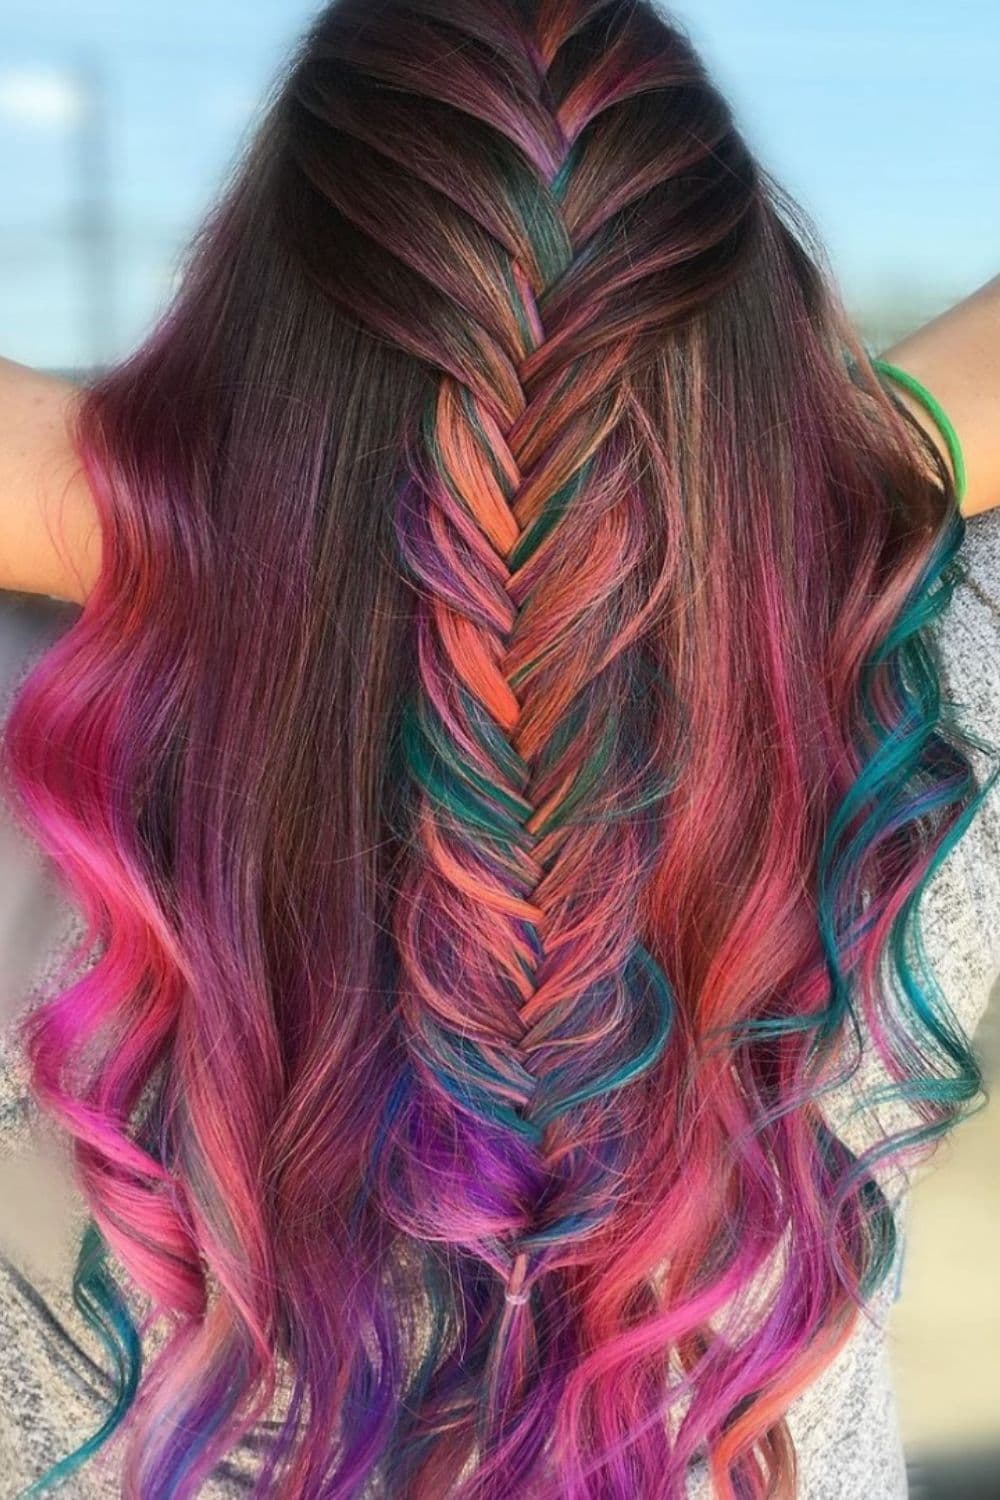 A woman with mixed color fishtail braids.